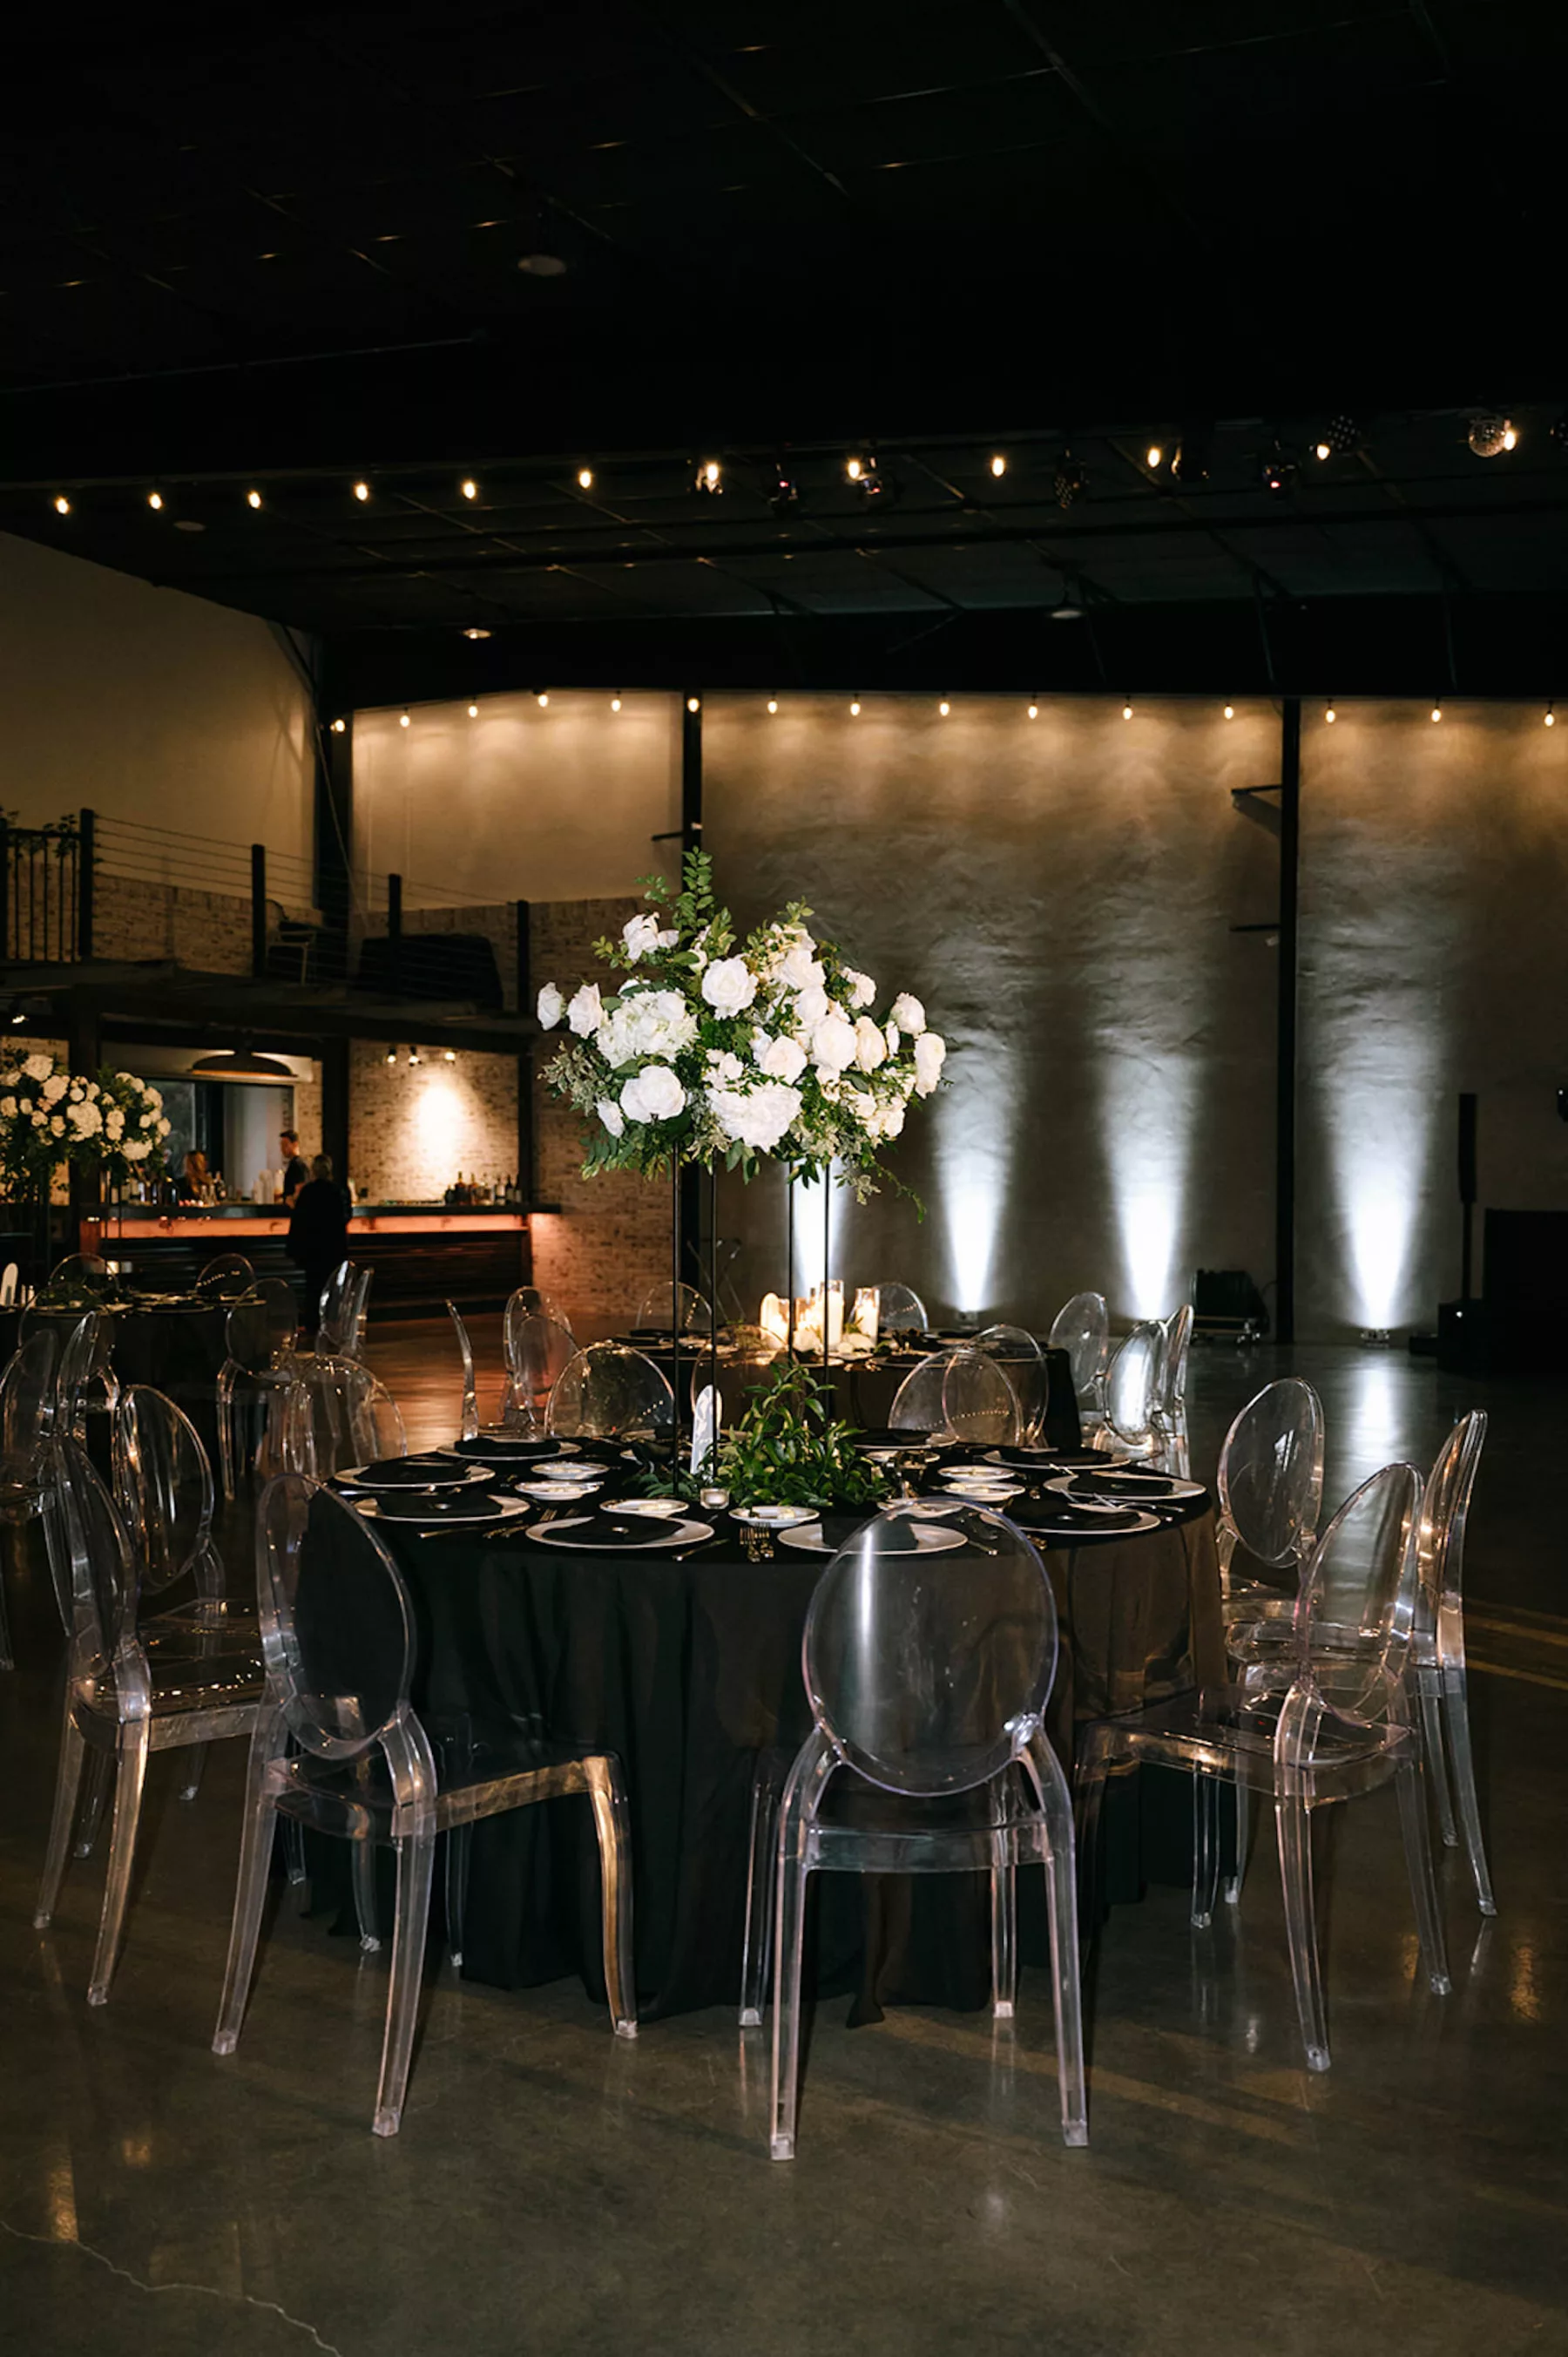 Moody Modern Black and White Wedding Reception Decor Ideas with Acrylic Ghost Chairs | Tampa Bay Event Planner Kelci Leigh Events | Florist Bloom Shakalaka